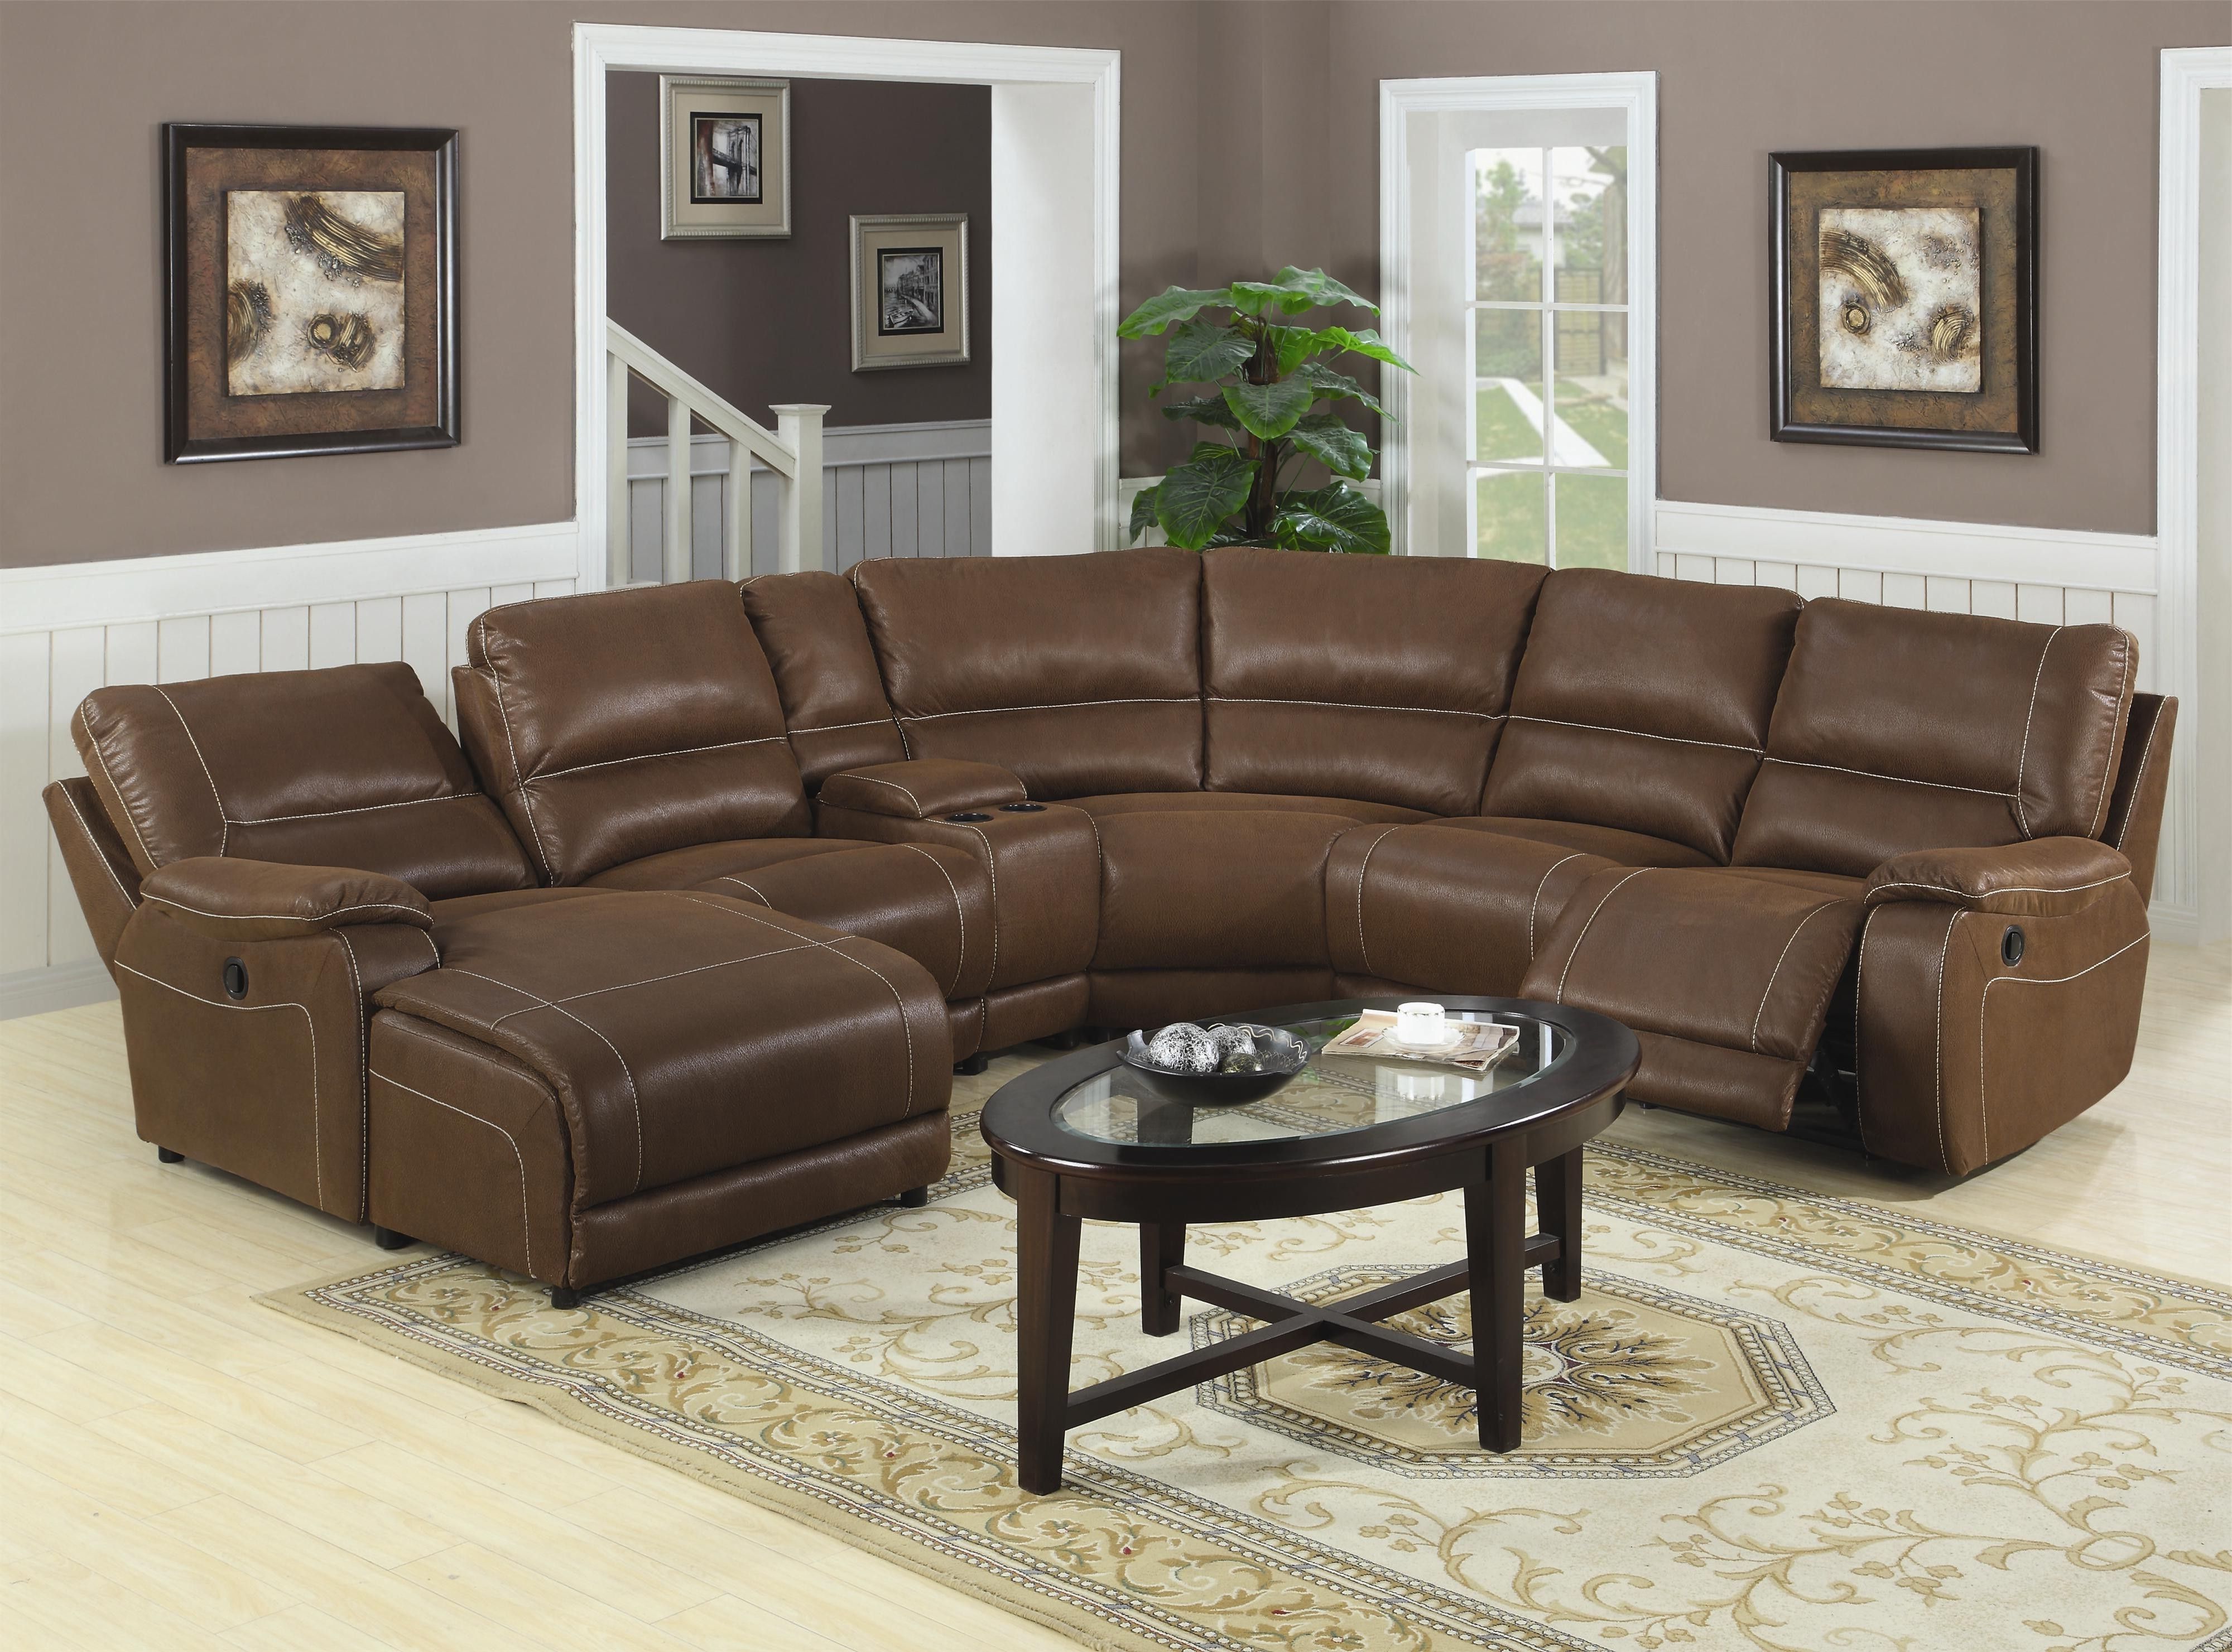 Sofa : Ashley Maier Sectional Sofa Laura Ashley Sectional Sofa Regarding Favorite Red Leather Sectional Sofas With Recliners (Photo 12 of 20)